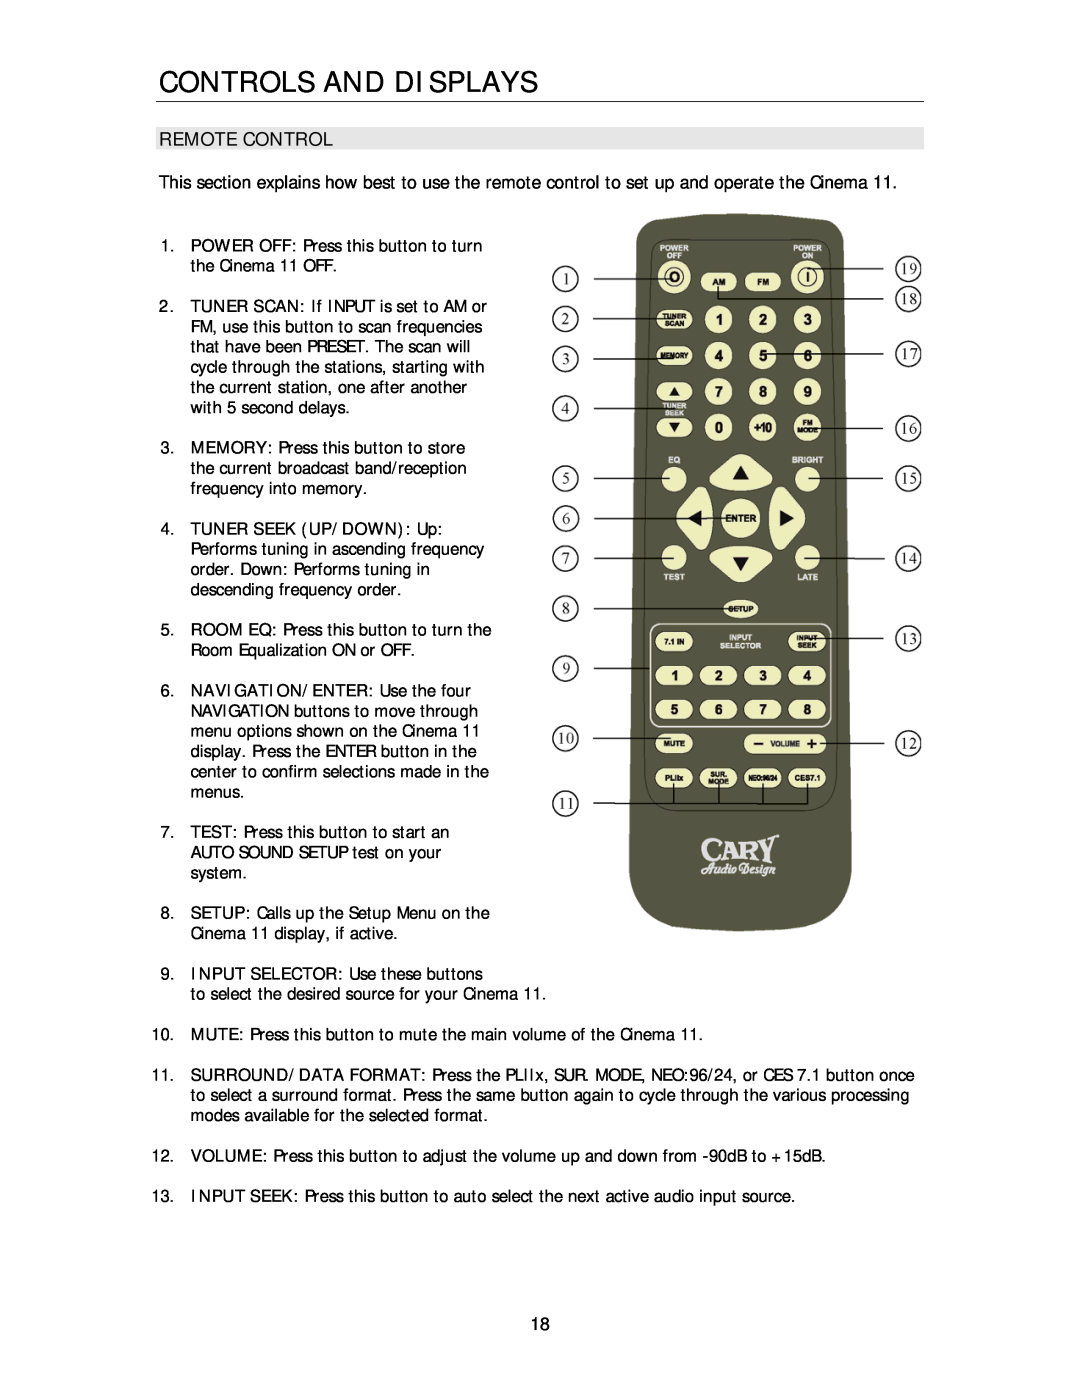 Cary Audio Design Cinema 11 owner manual Remote Control, Controls And Displays 